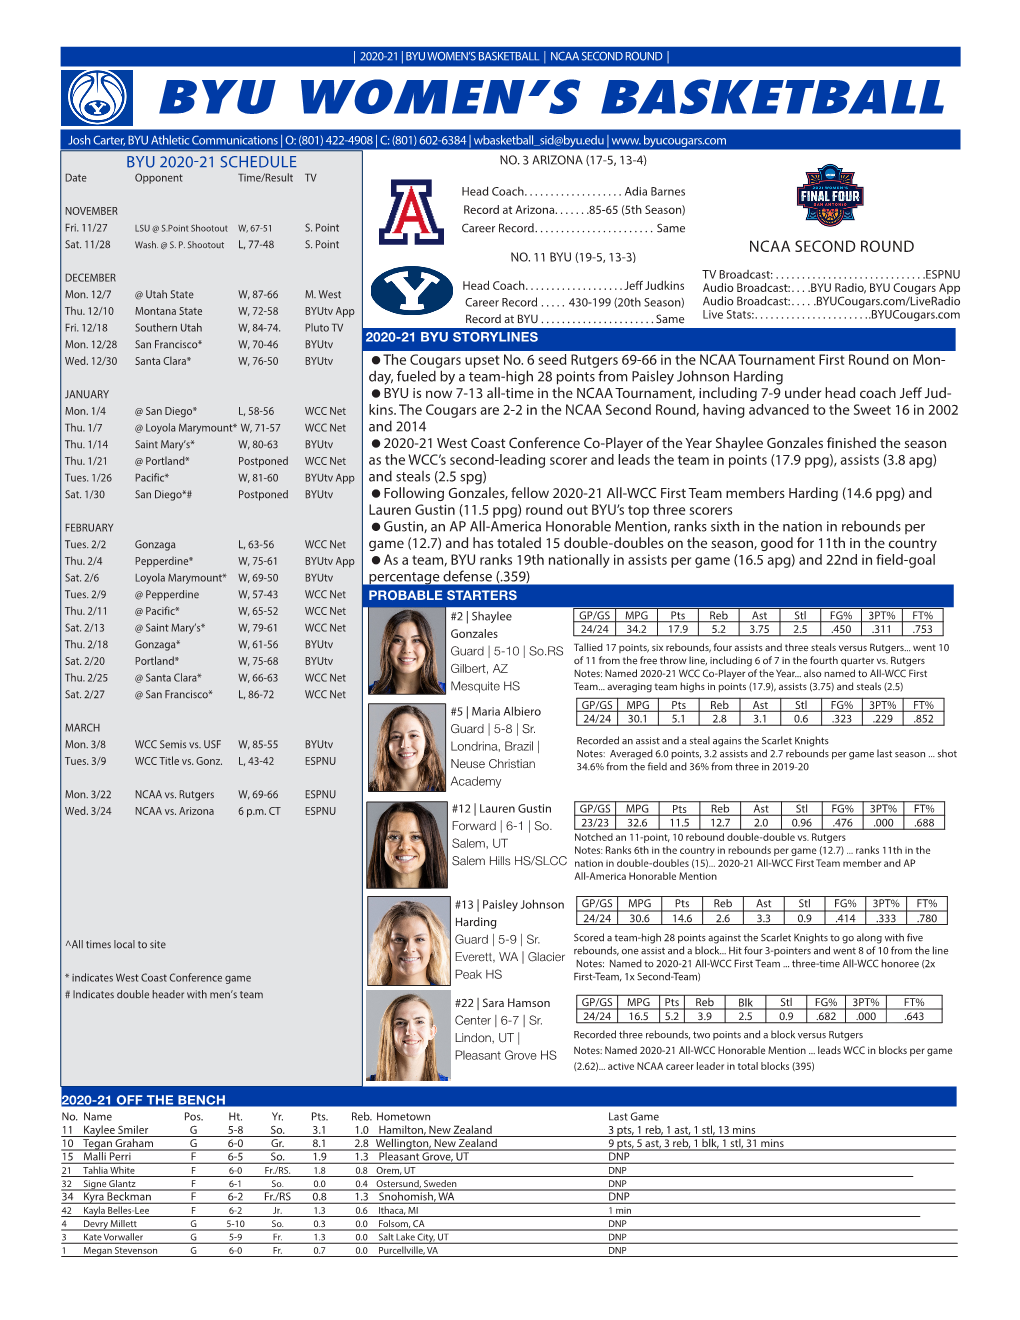 BYU Women's Basketball Page 2/16 Individual Game-By-Game 3PA 7 (6X), at USF - 2/27/21 As of Mar 22, 2021 All Games FTM 6, at LMU - 1/7/21 FTA 8, at LMU - 1/7/21